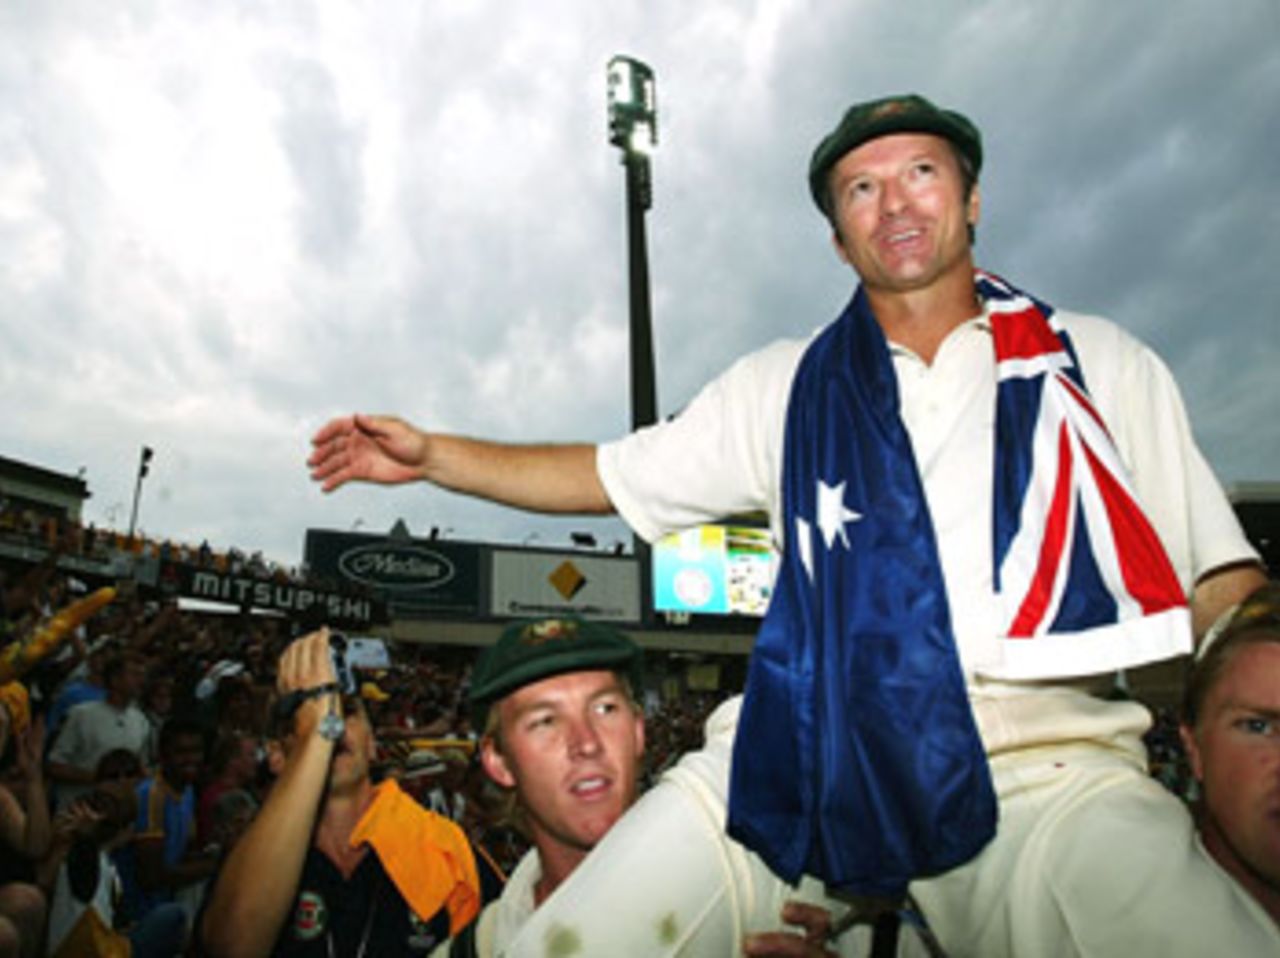 Steve Waugh does a lap of honour at the end of the Test match, Australia v India, 4th Test, Sydney, 5th day, January 6, 2004